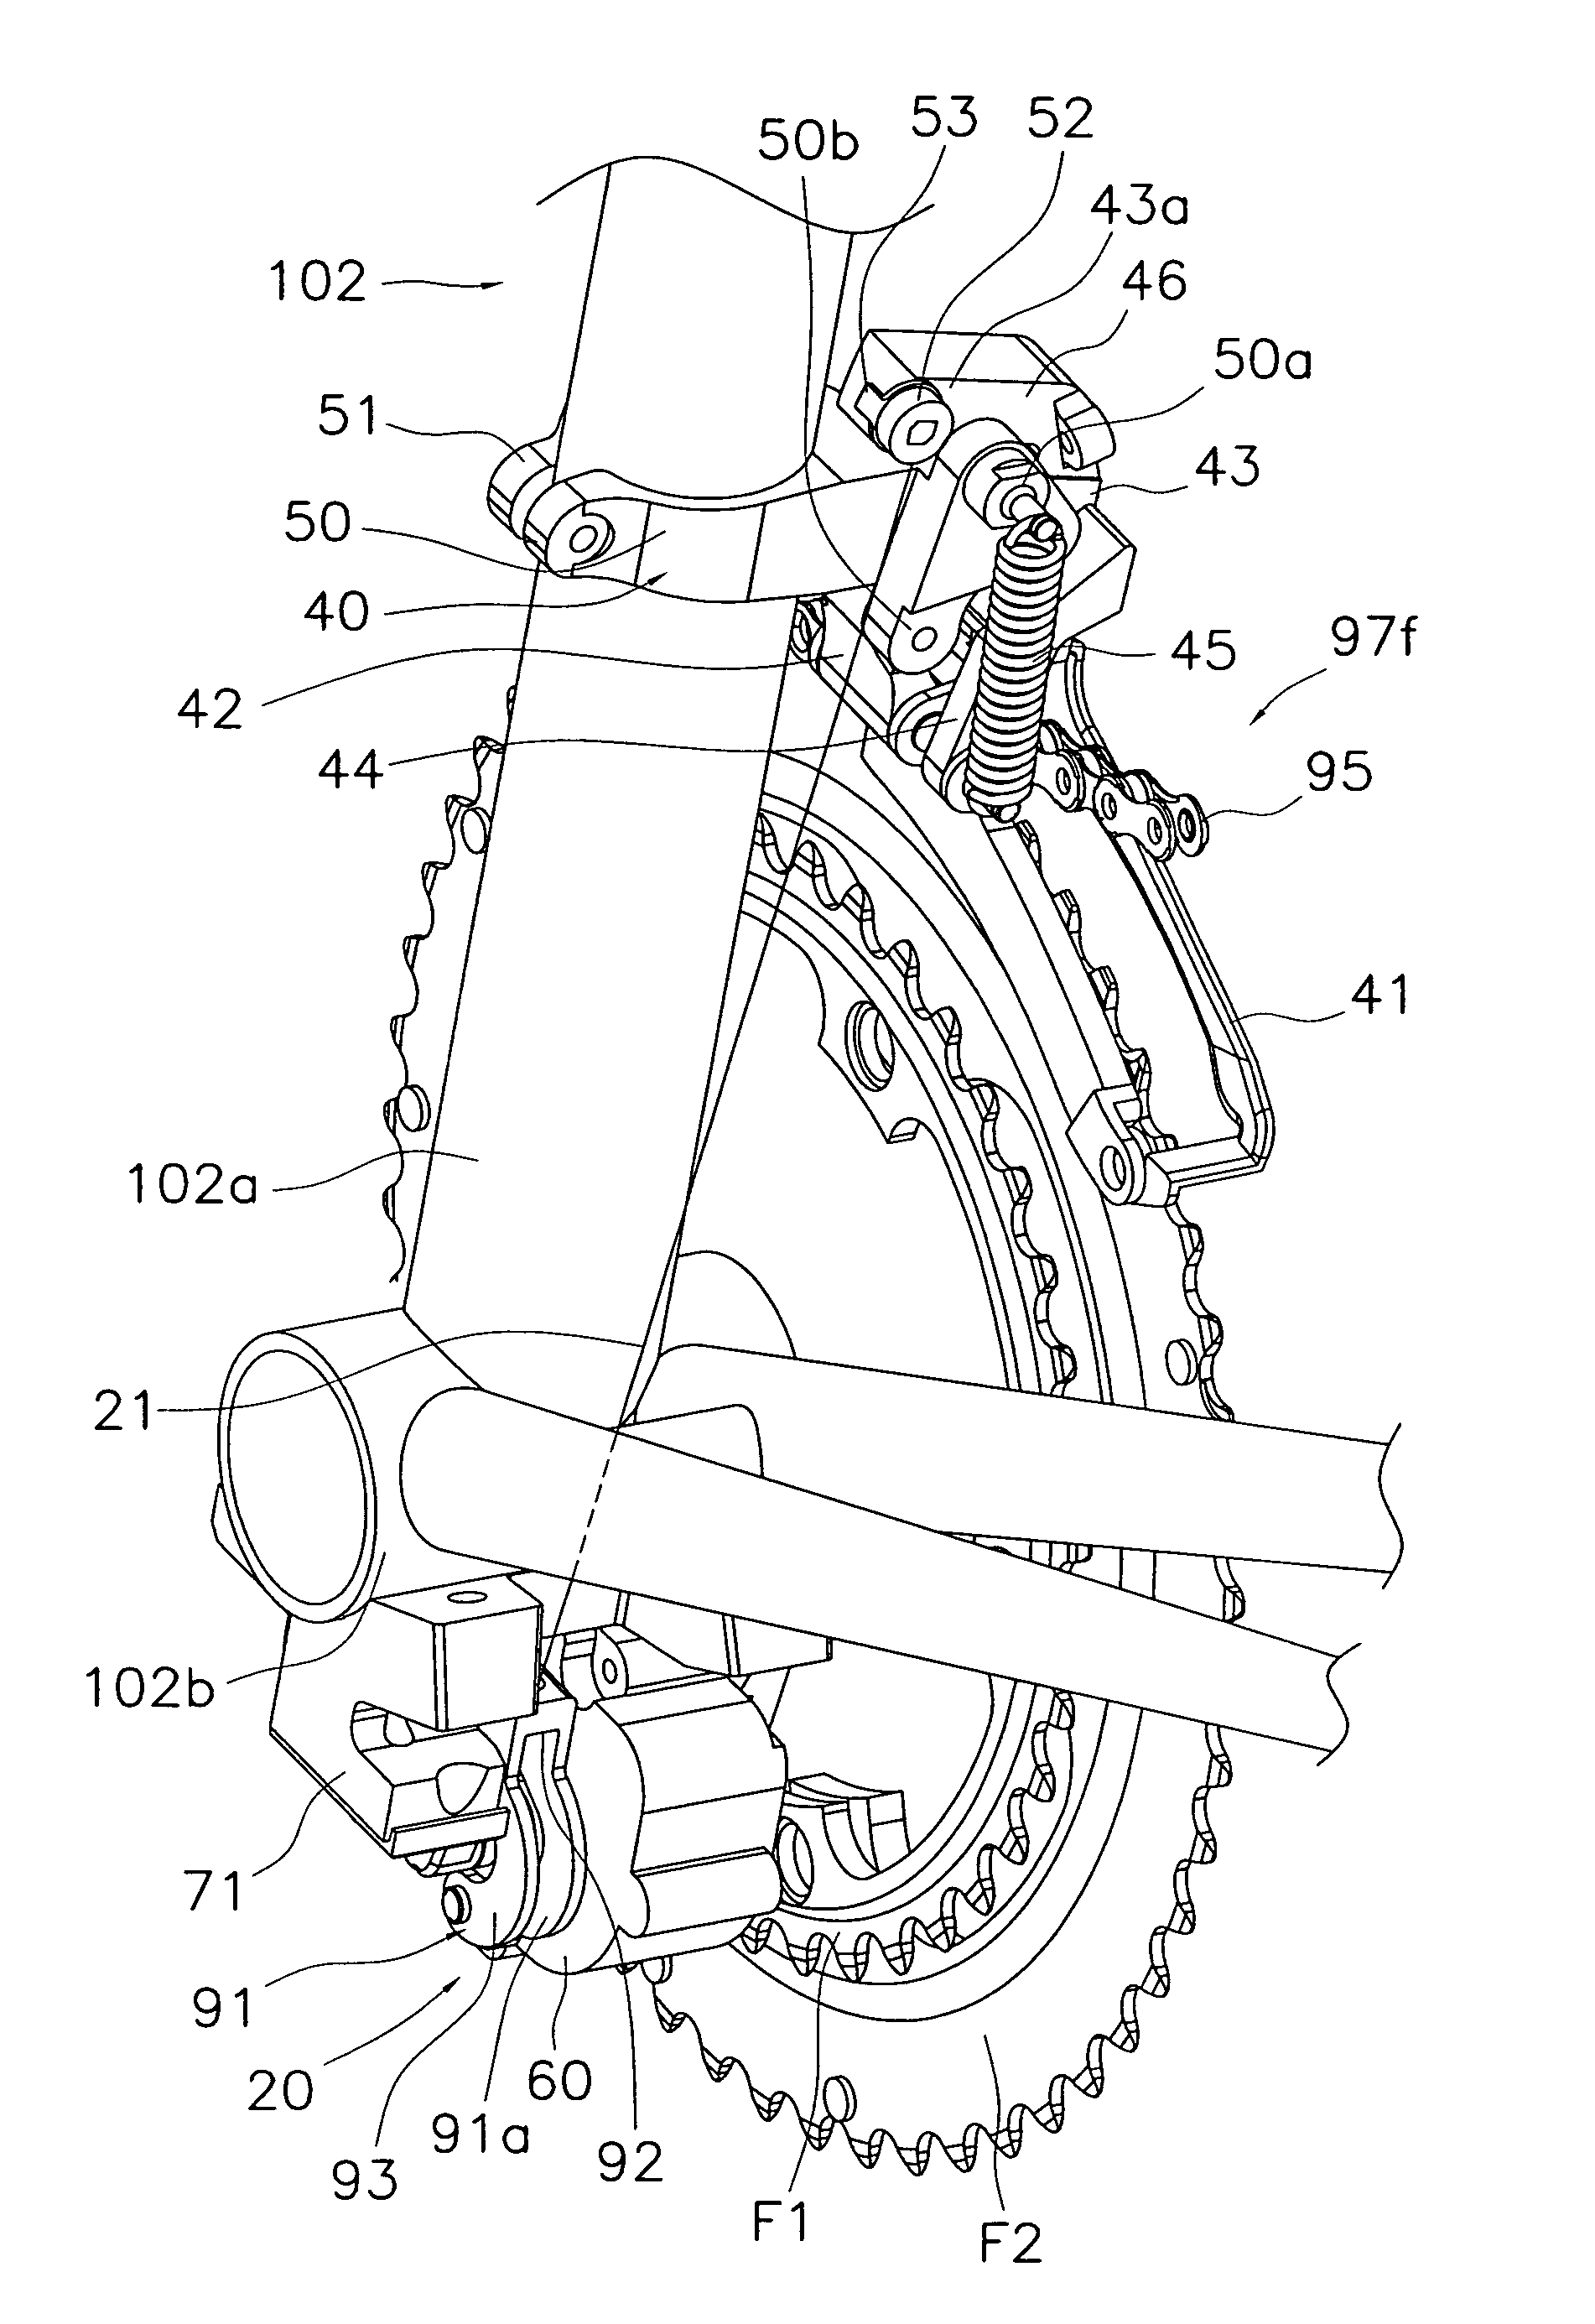 Front derailleur for bicycle